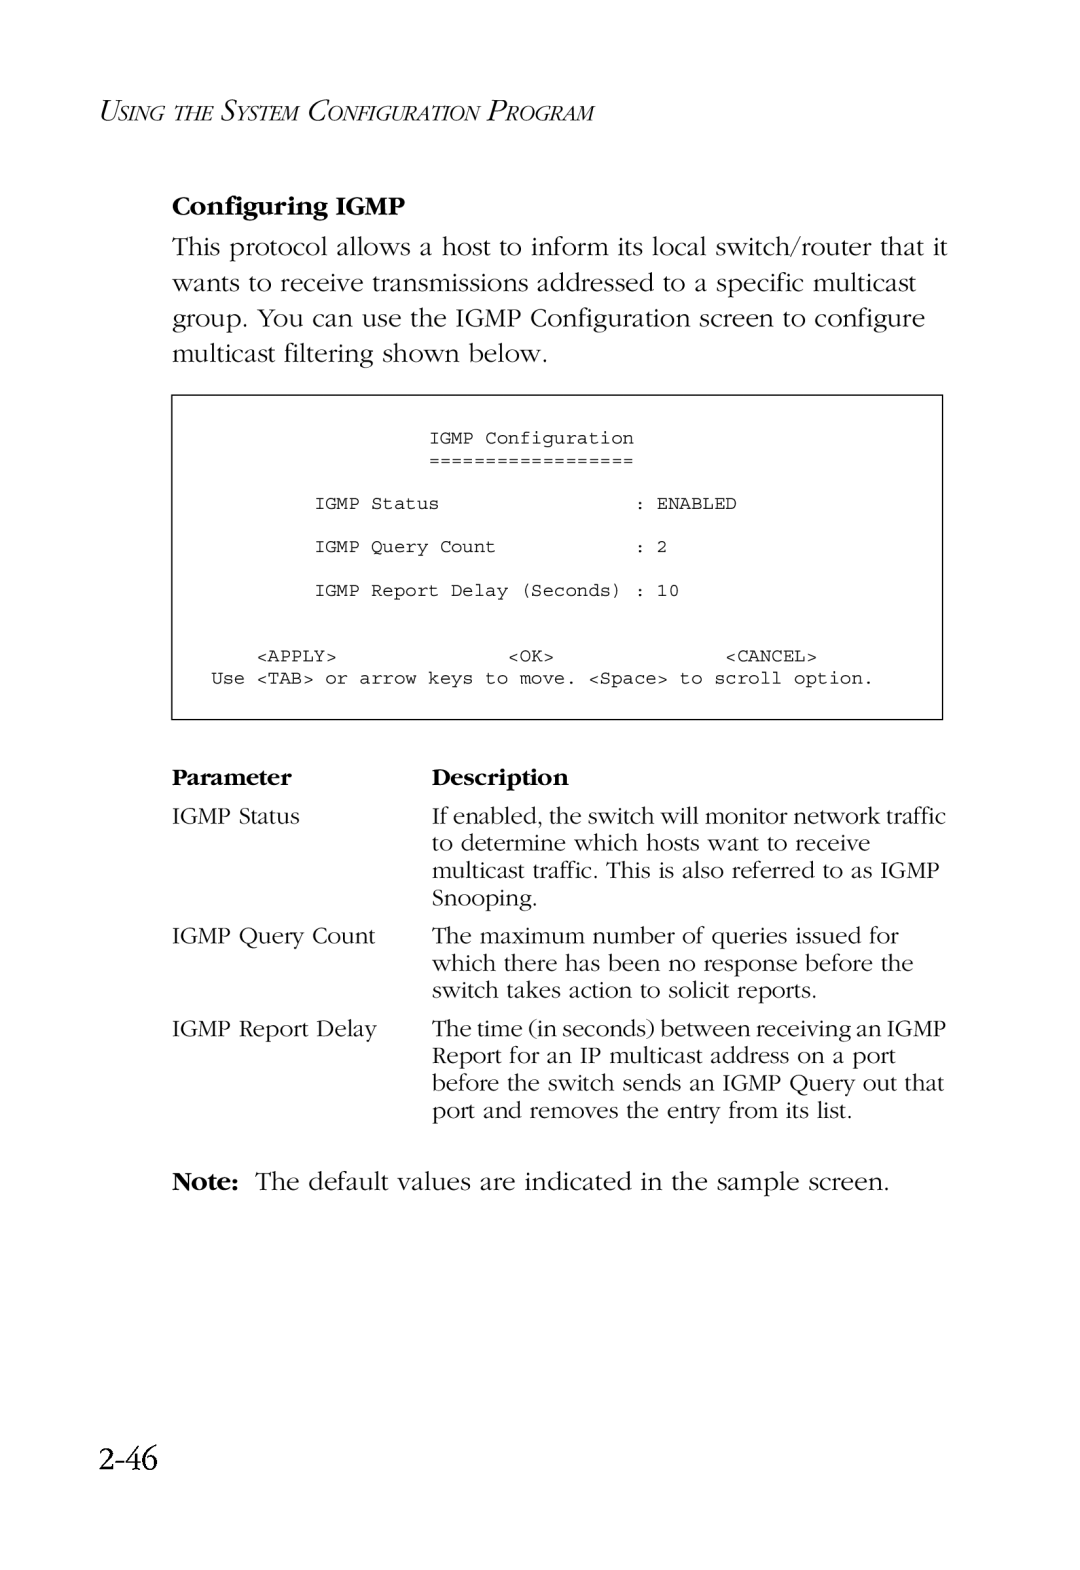 SMC Networks SMC6924VF manual 2-46, Configuring IGMP, Note The default values are indicated in the sample screen 